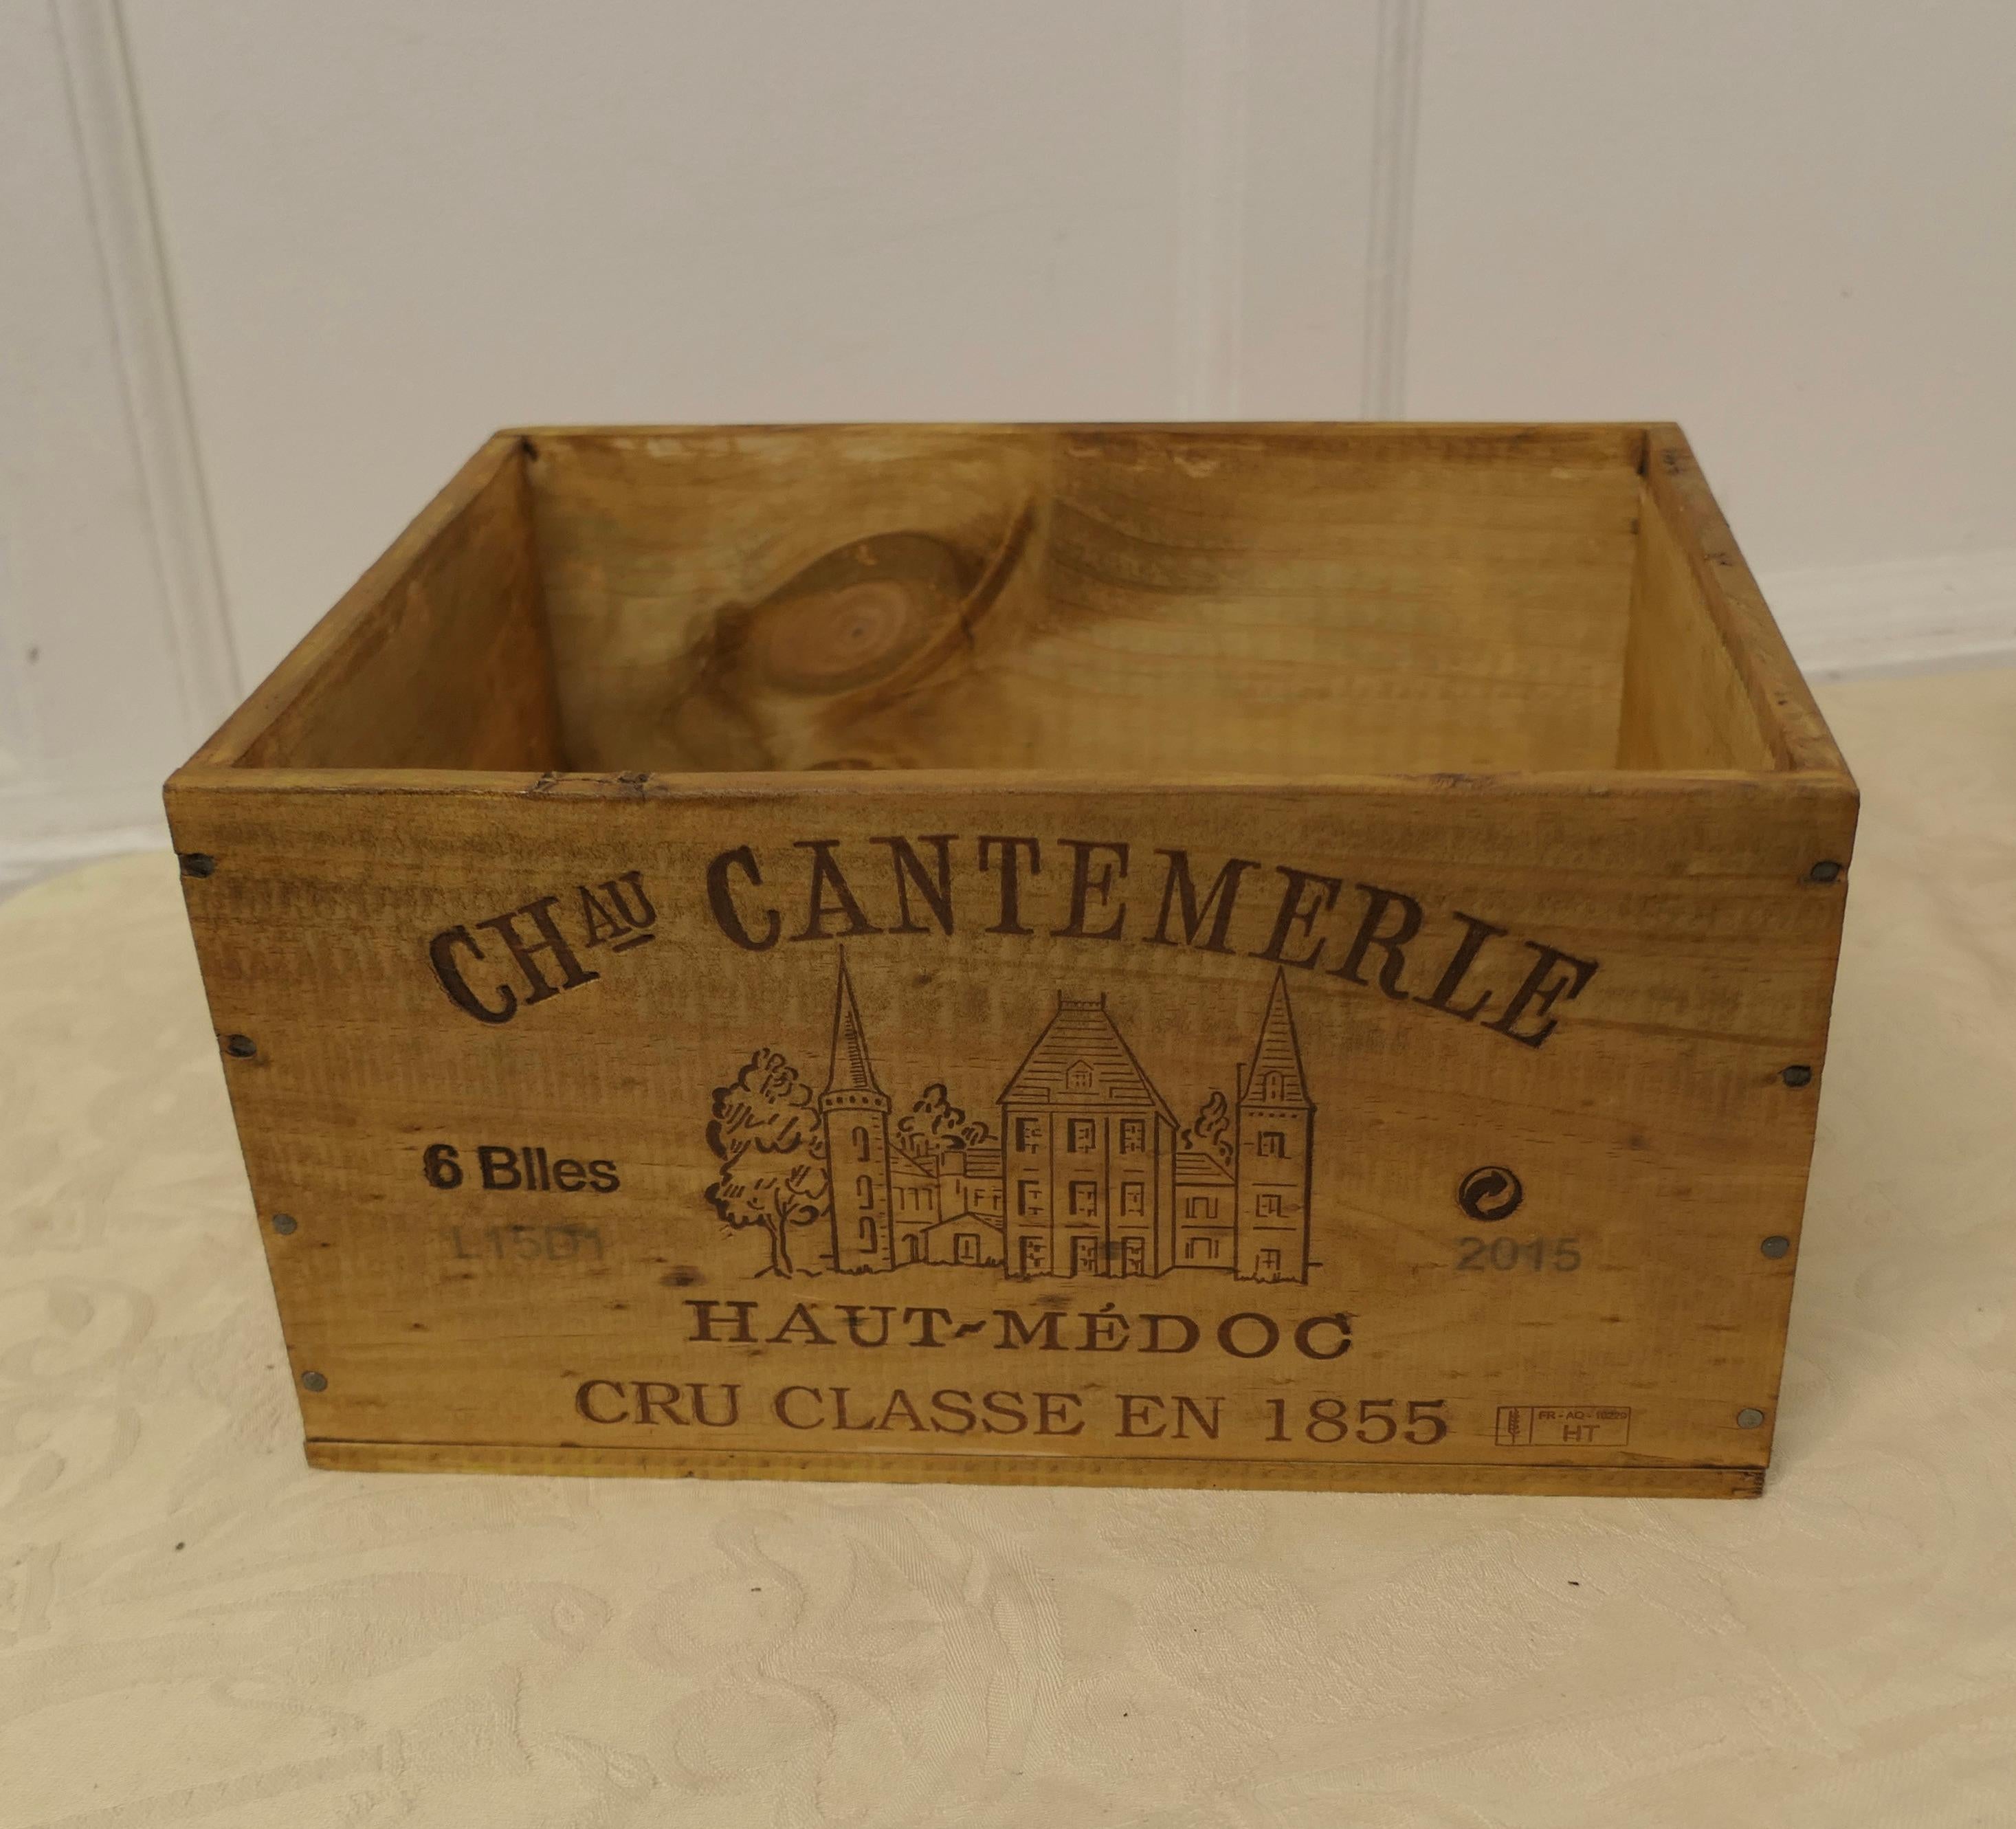  Bespoke Wine Box Gift Box, Tidy, Hamper, Caddy

This attractive piece can be put to many uses, with Christmas and Thanks Giving just around the corner, it would make a great hamper or simple Gift box to set off that special Surprise

Once the